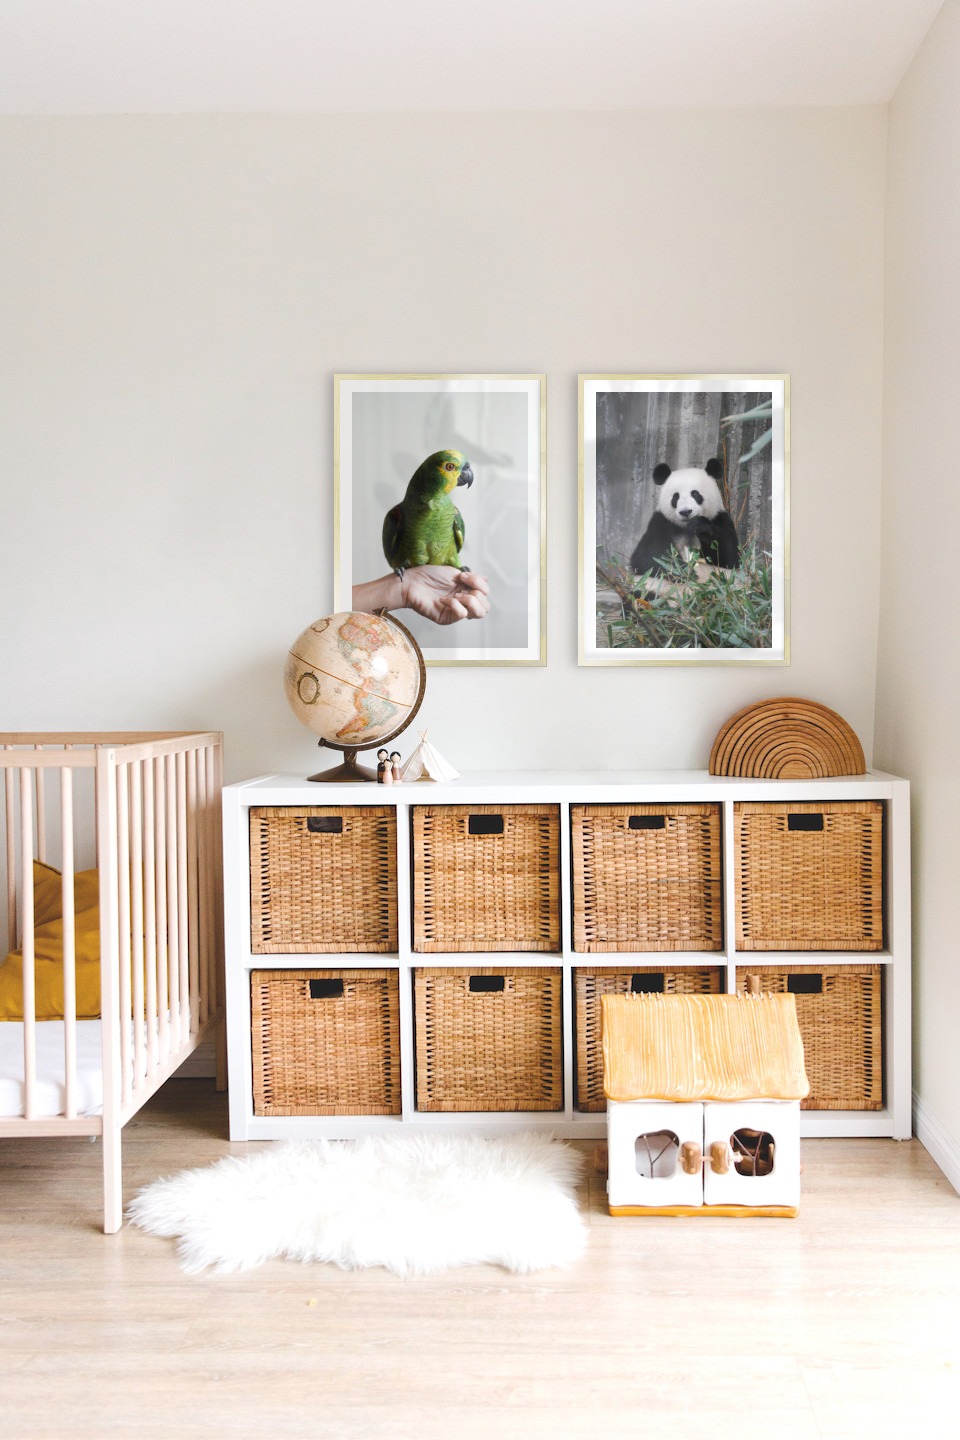 Gallery wall with picture frames in gold in sizes 50x70 with prints "Green parrot" and "Panda"